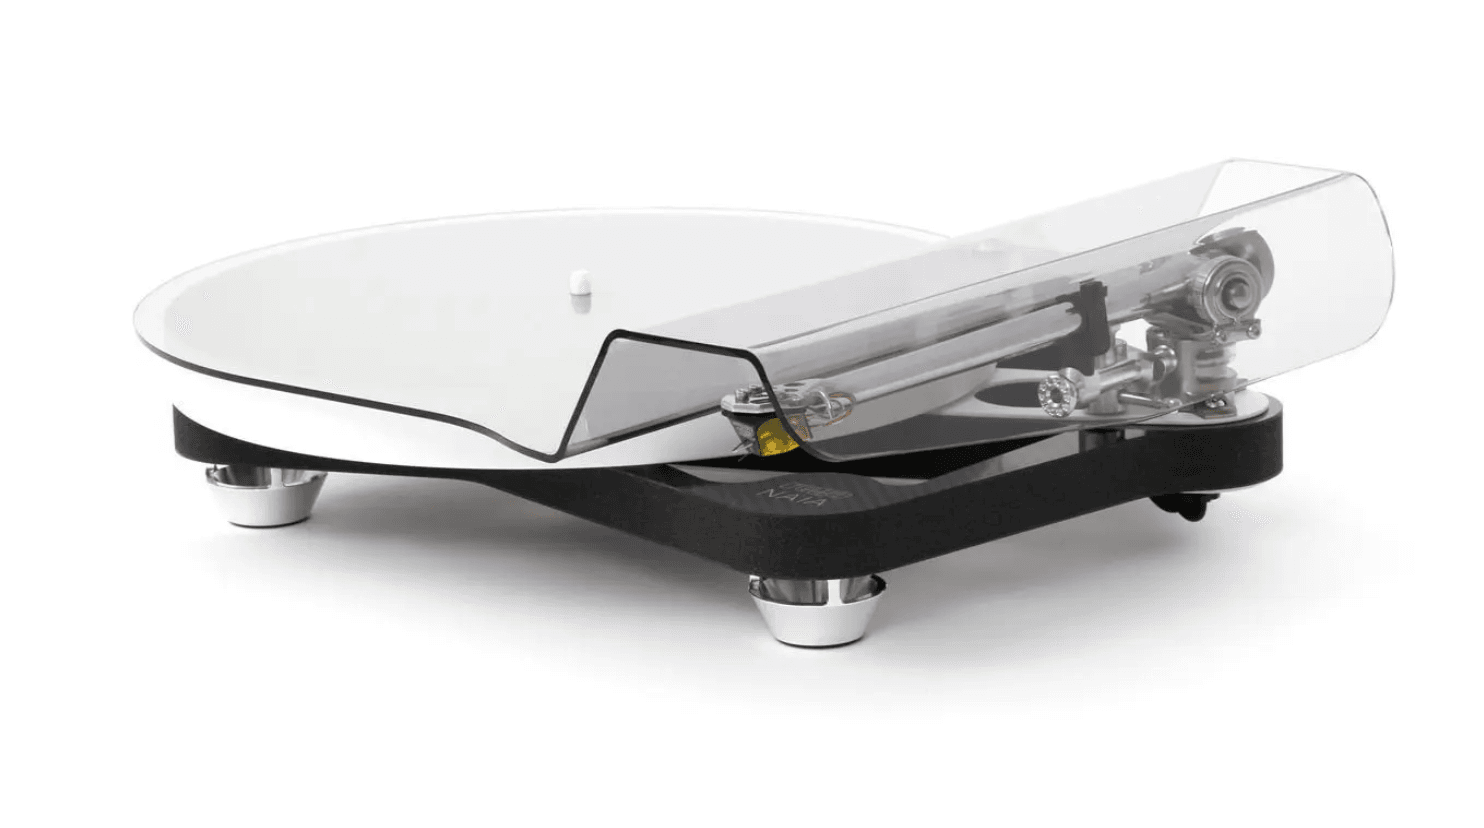 Rega Launches the Naia: A New Benchmark in Turntable Innovation